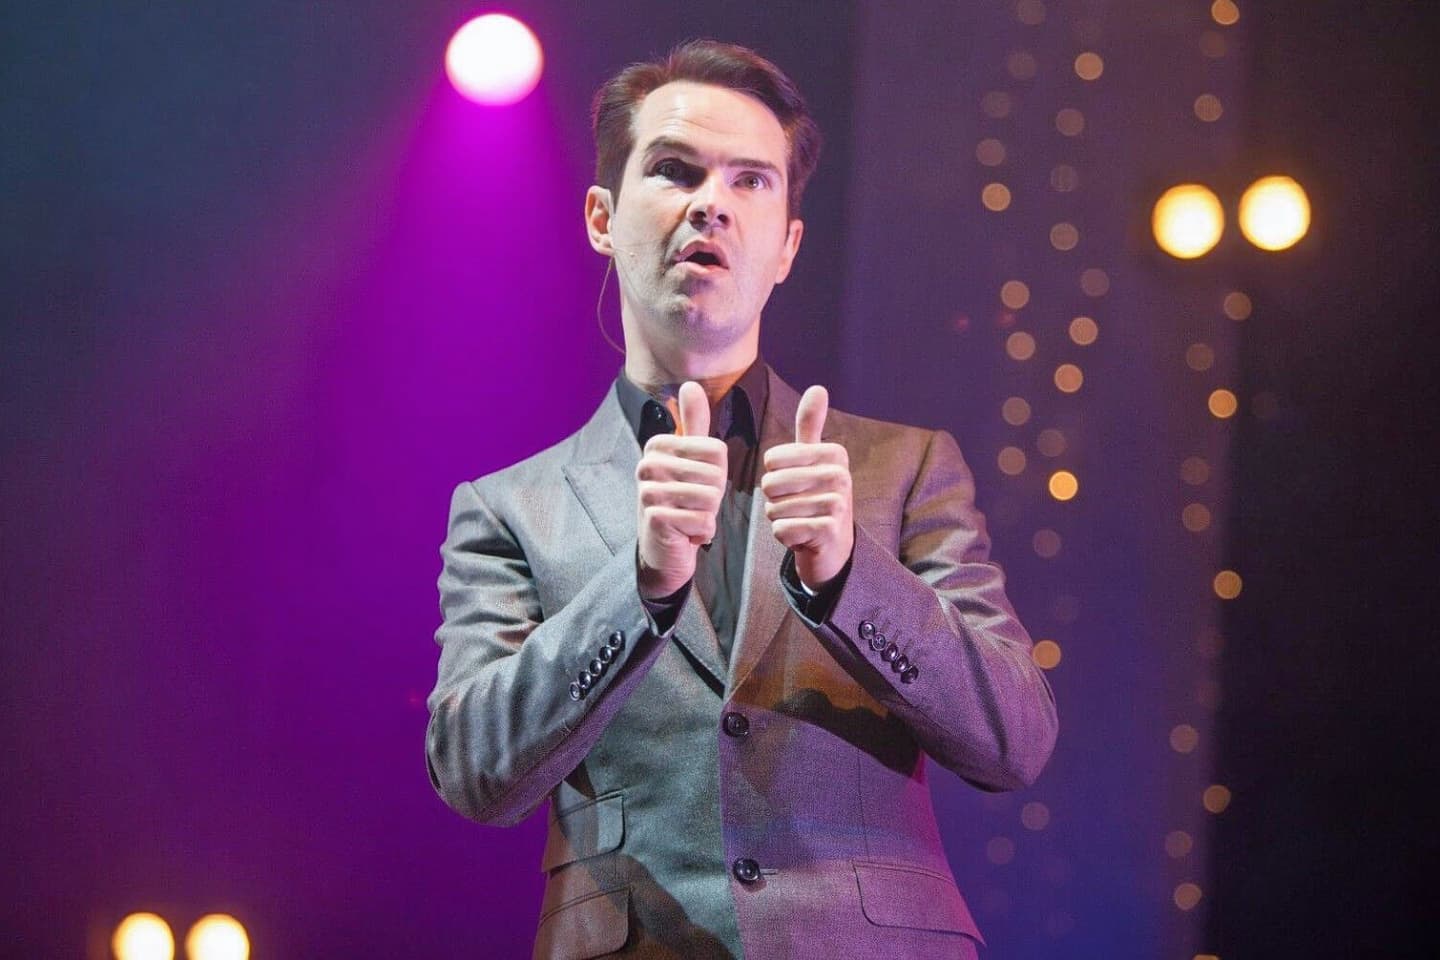 Jimmy Carr Tickets Buy or Sell Tickets for Jimmy Carr Tour Dates